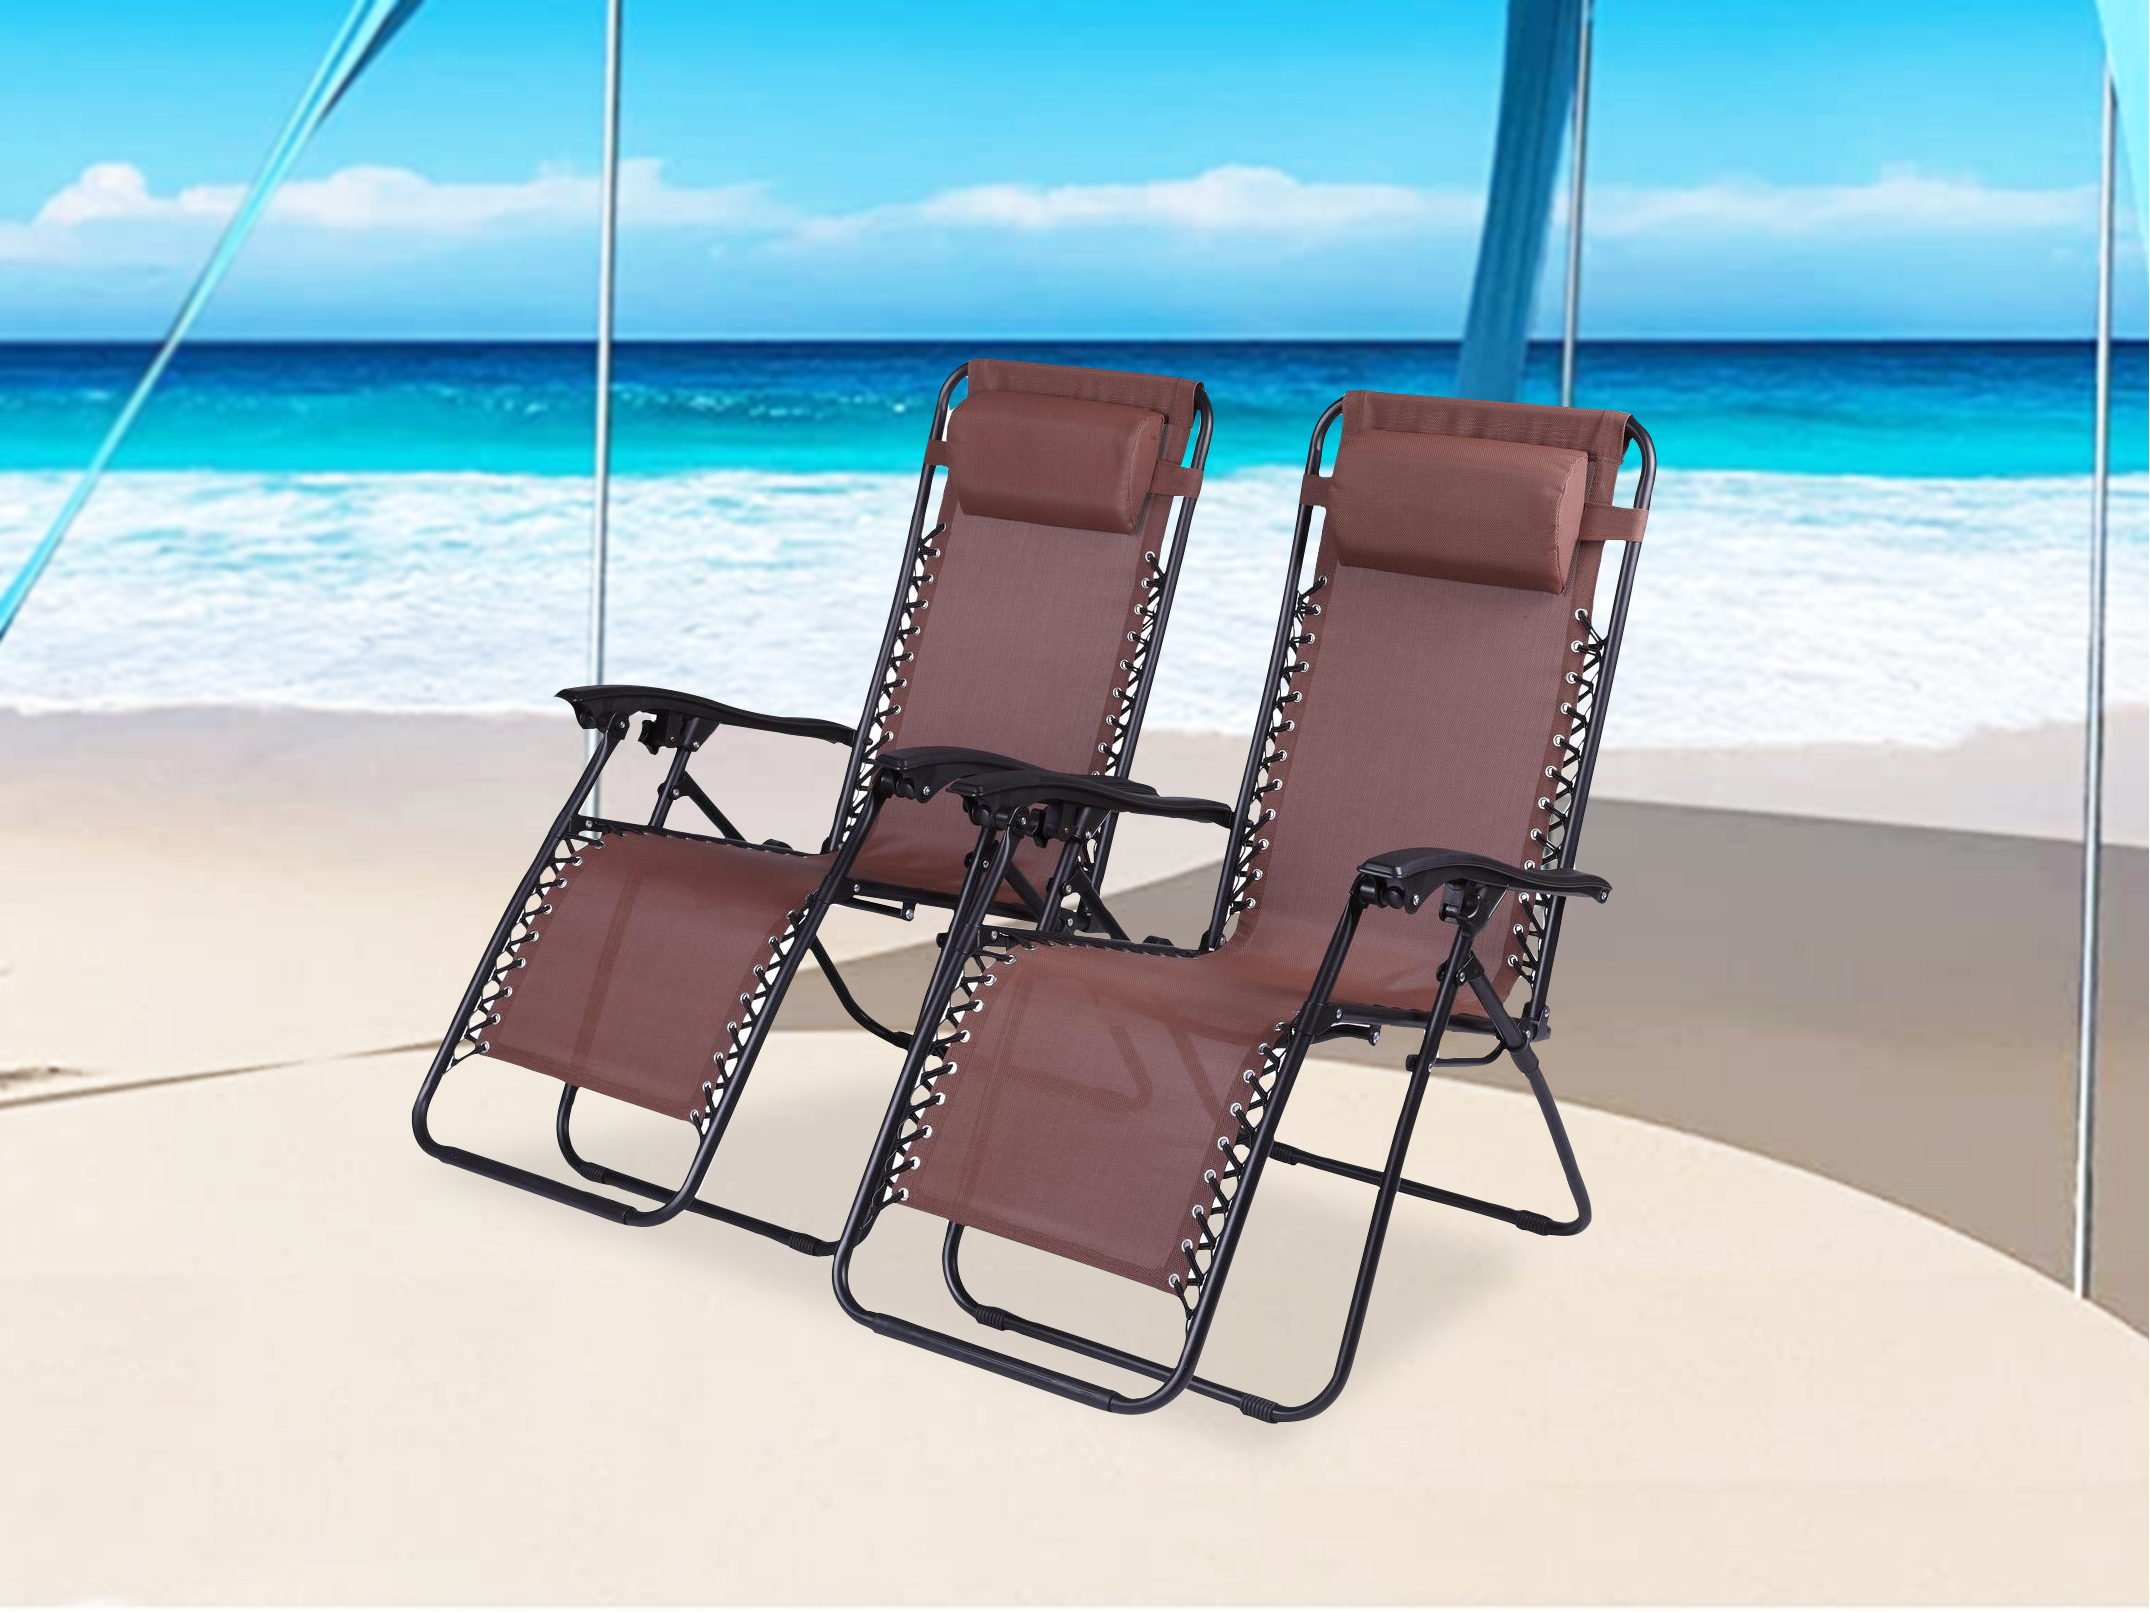 Zero Gravity Chairs Set of 2 Pool Lounge Chair Zero Gravity Recliner Lawn Patio Outdoor Porch Beach Backyard Anti Gravity Chair Folding Reclining Camping Chair, Brown - image 1 of 10